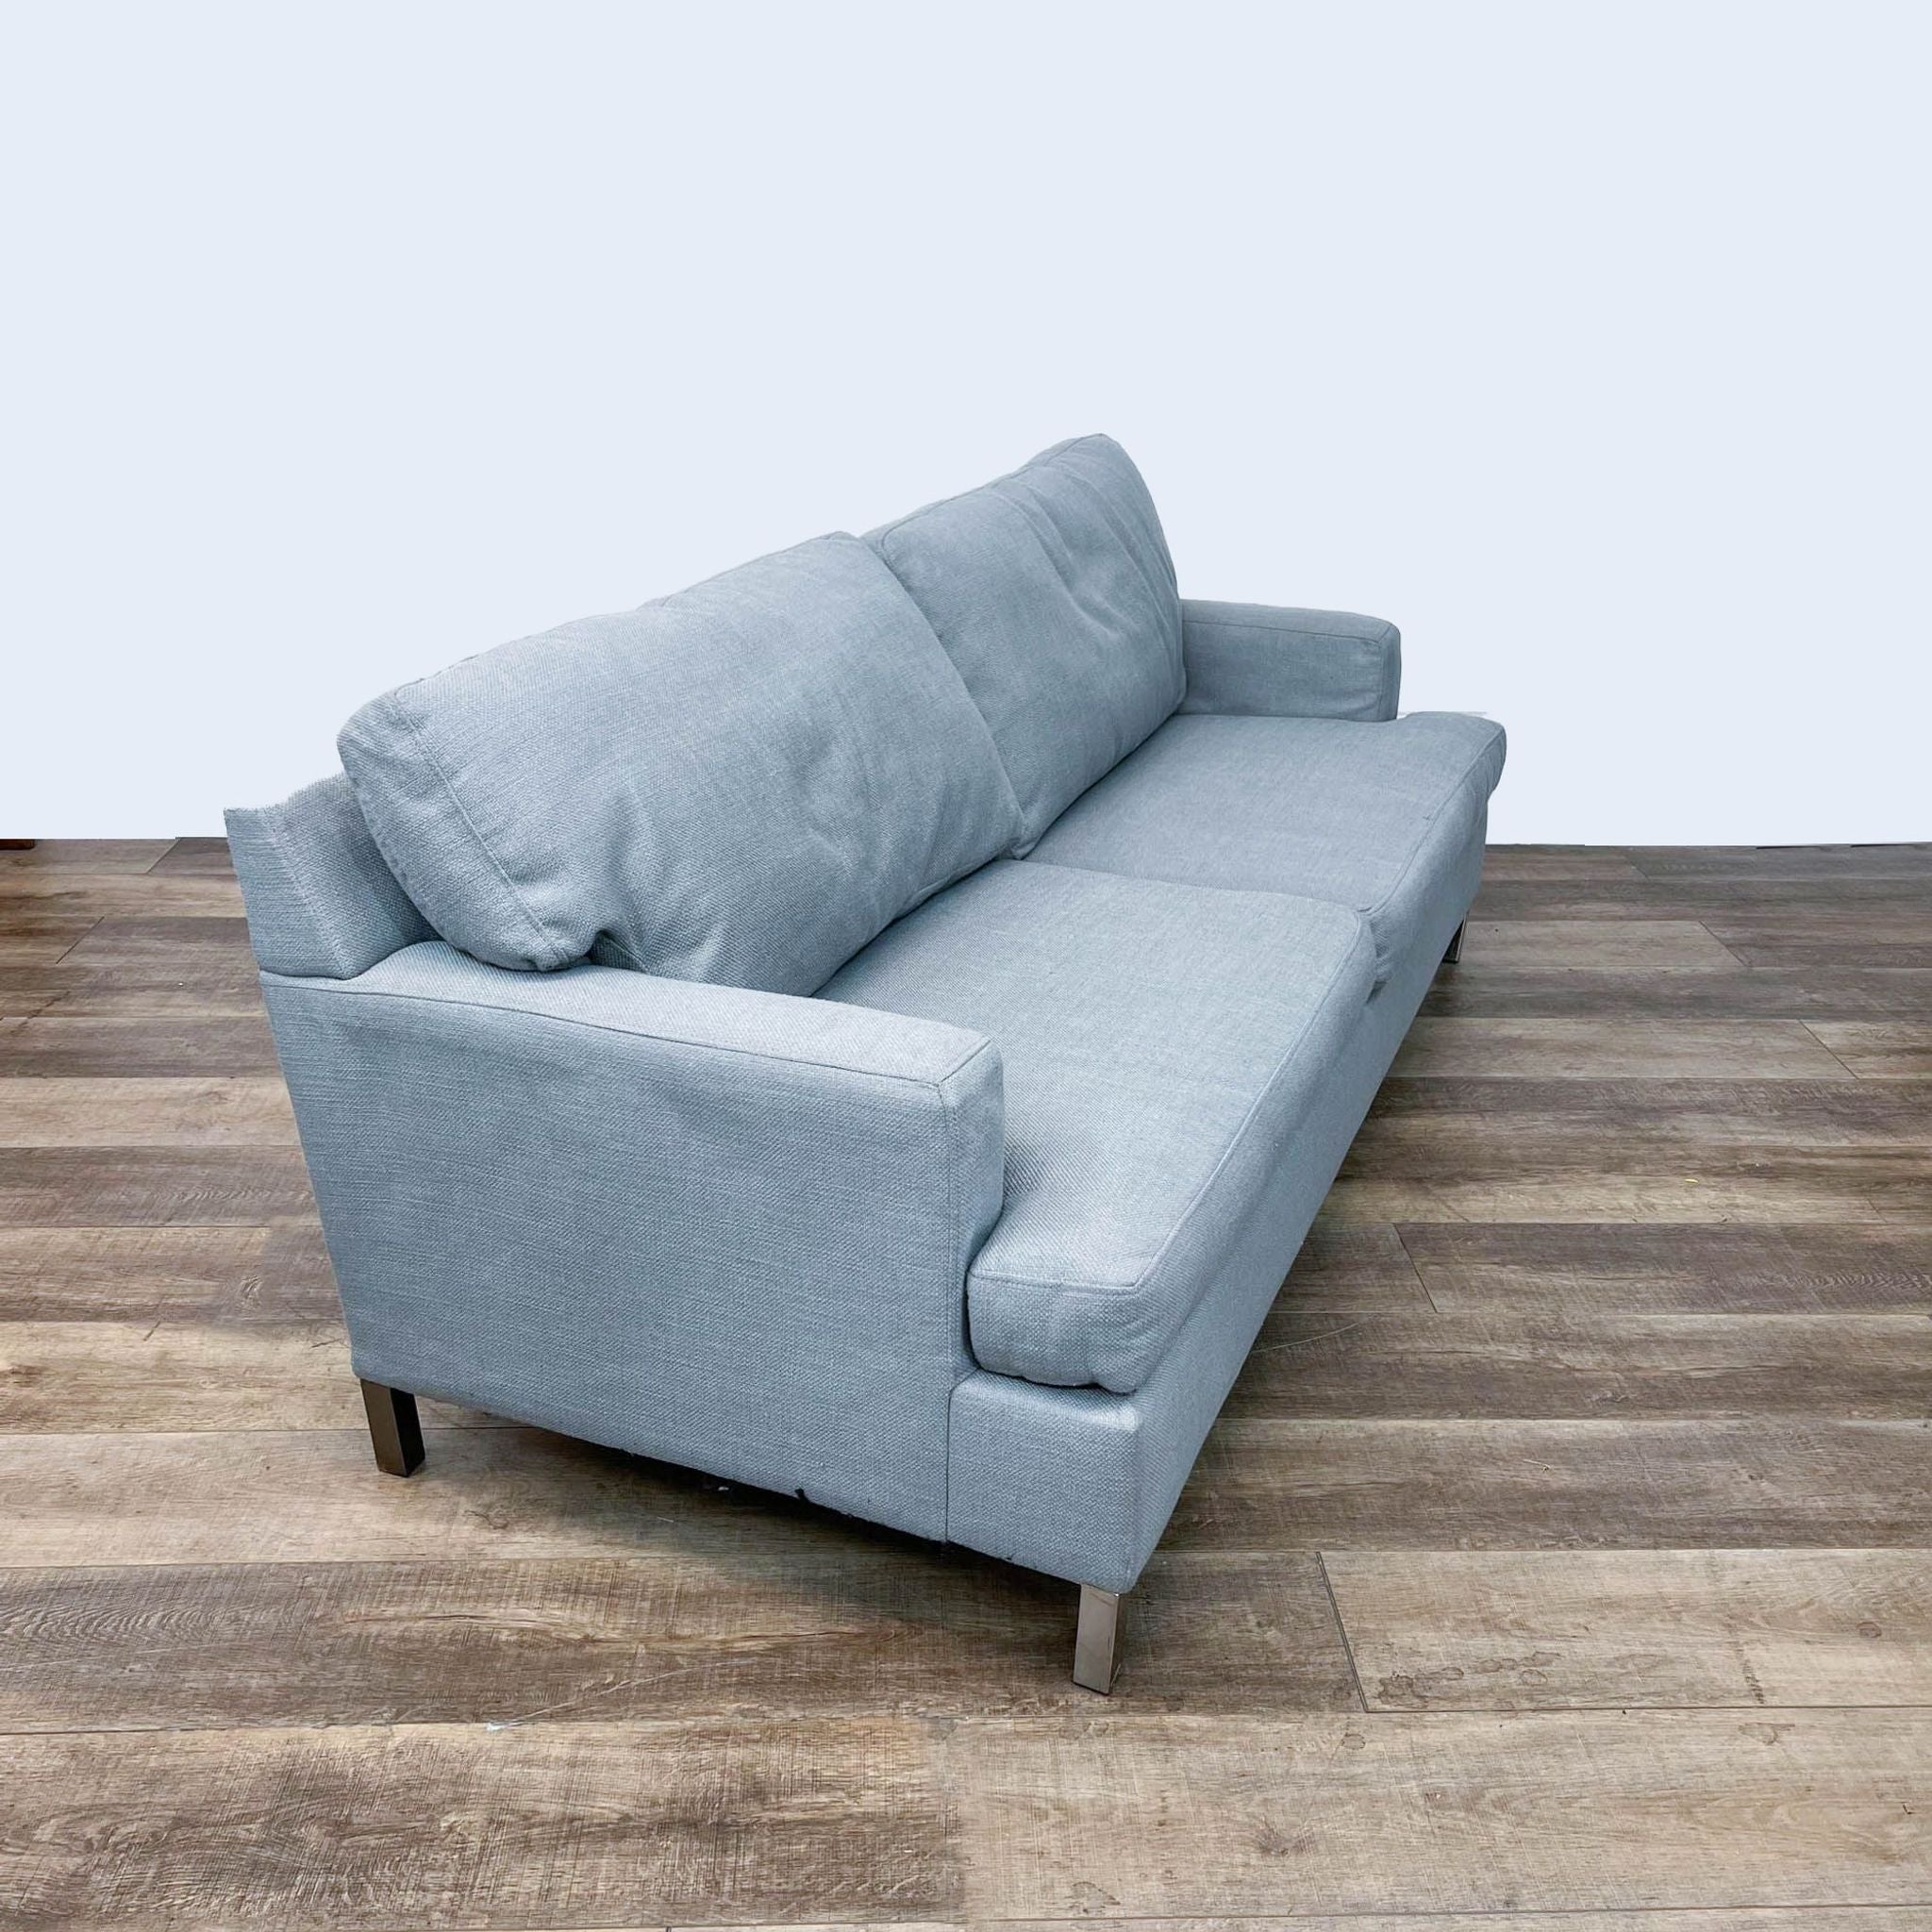 Better by Design 3-seat sofa featuring a gray linen texture, modern track arms, and sleek nickel legs.